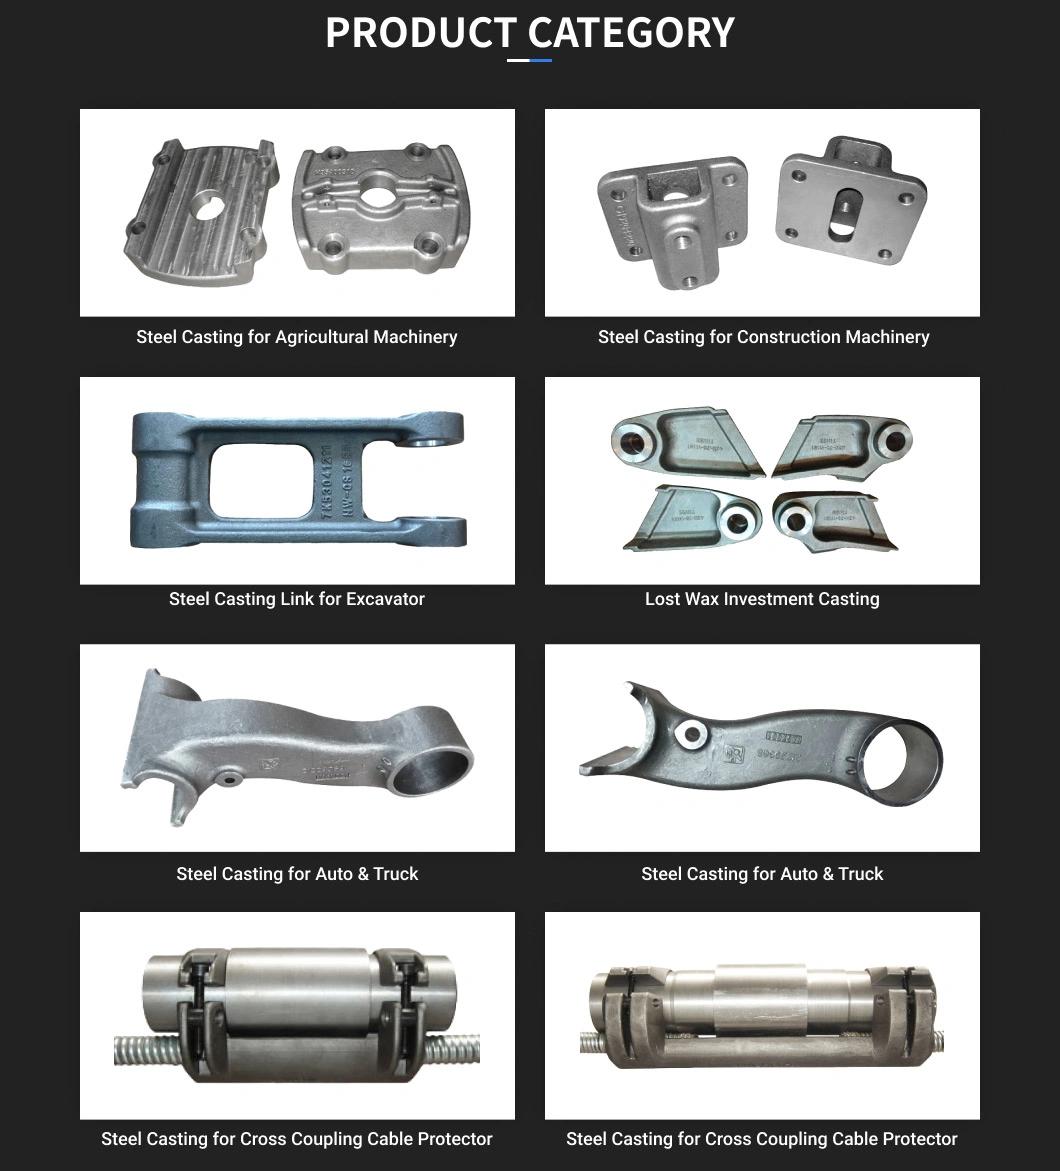 High Performance Top Technology Quick Proofing Professional Steel Casting Part